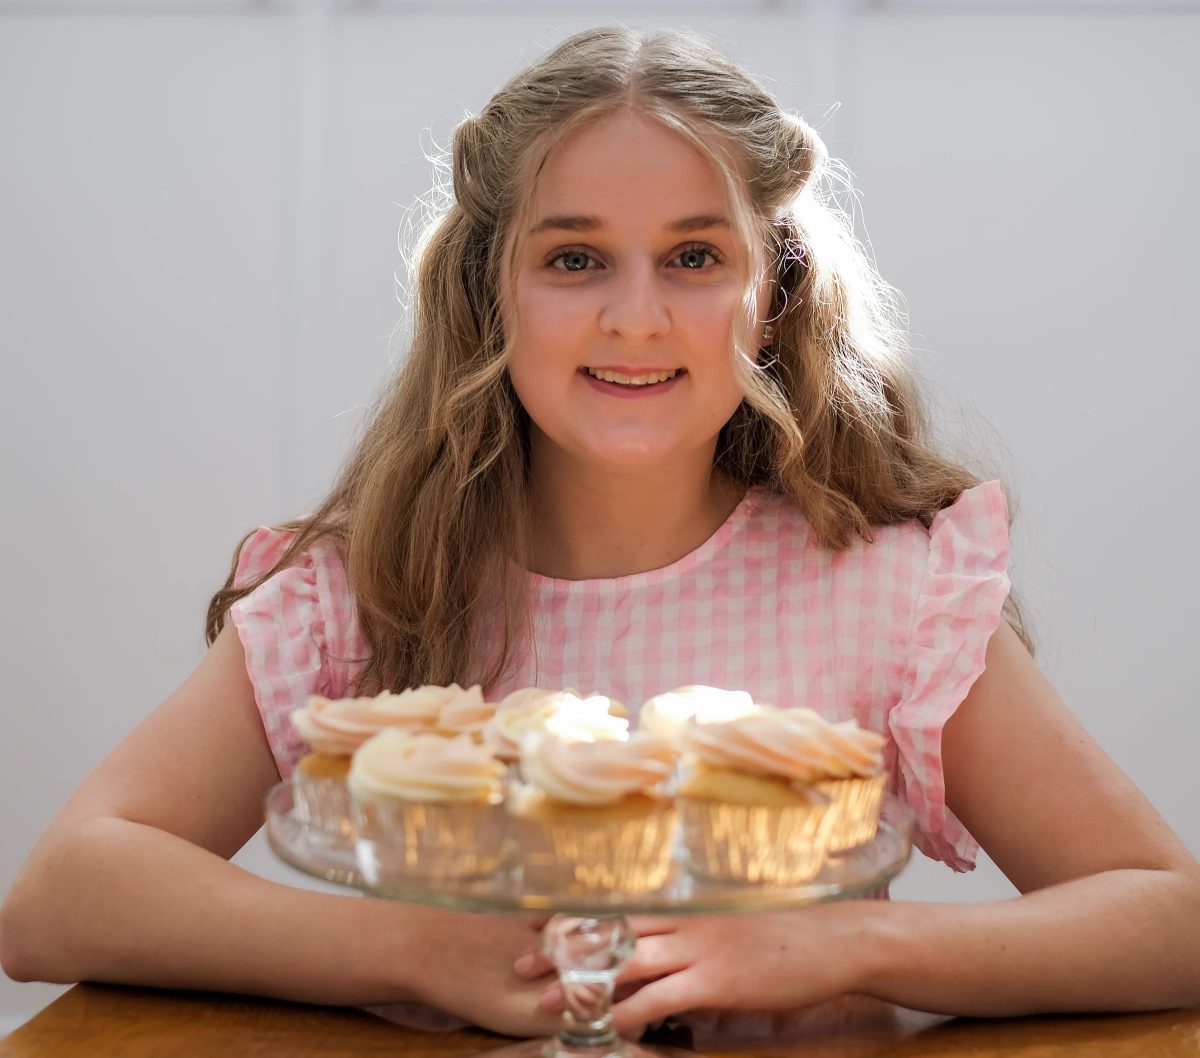 A young woman holding a dish of cupcakes